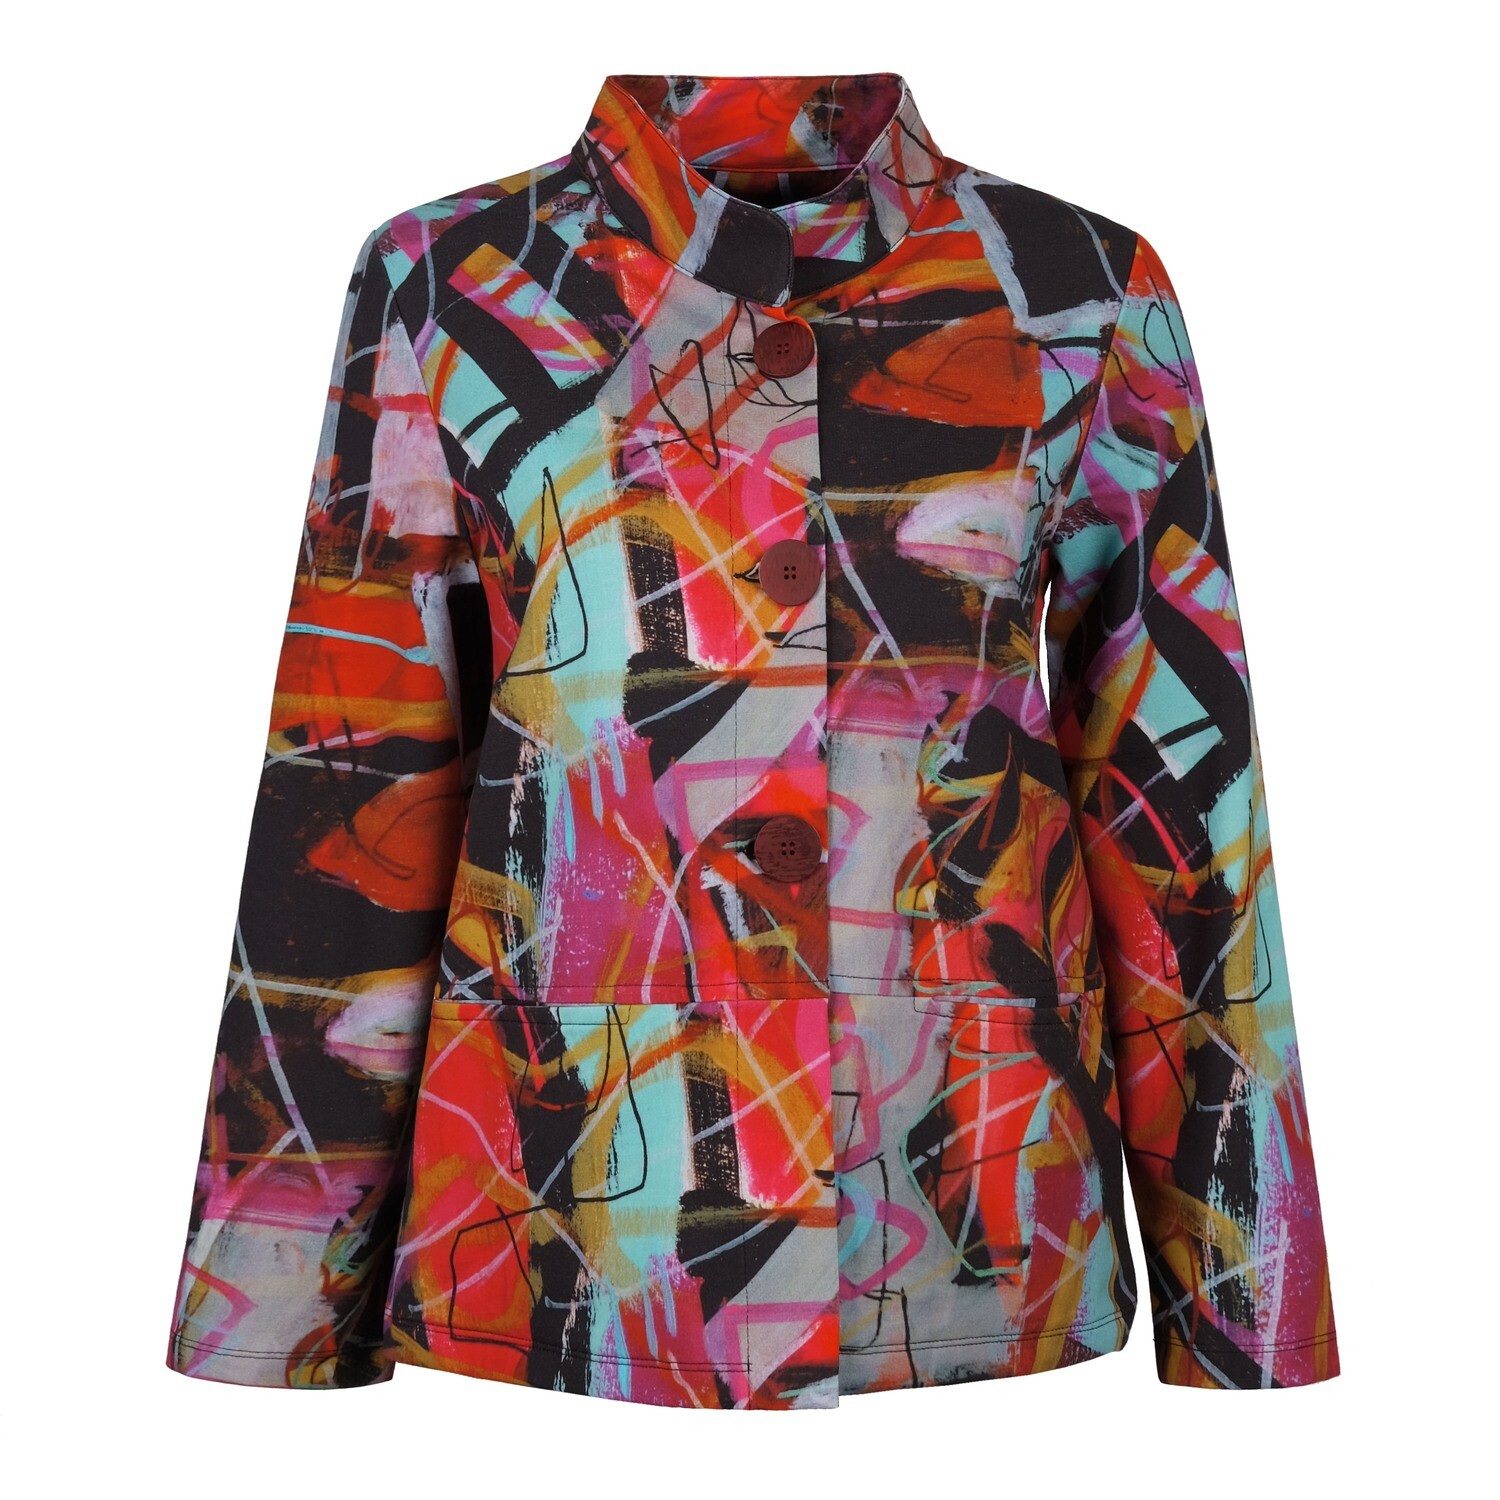 Simply Art Dolcezza: Red 3 Graffiti Abstract Art Flared Jacket SOLD OUT